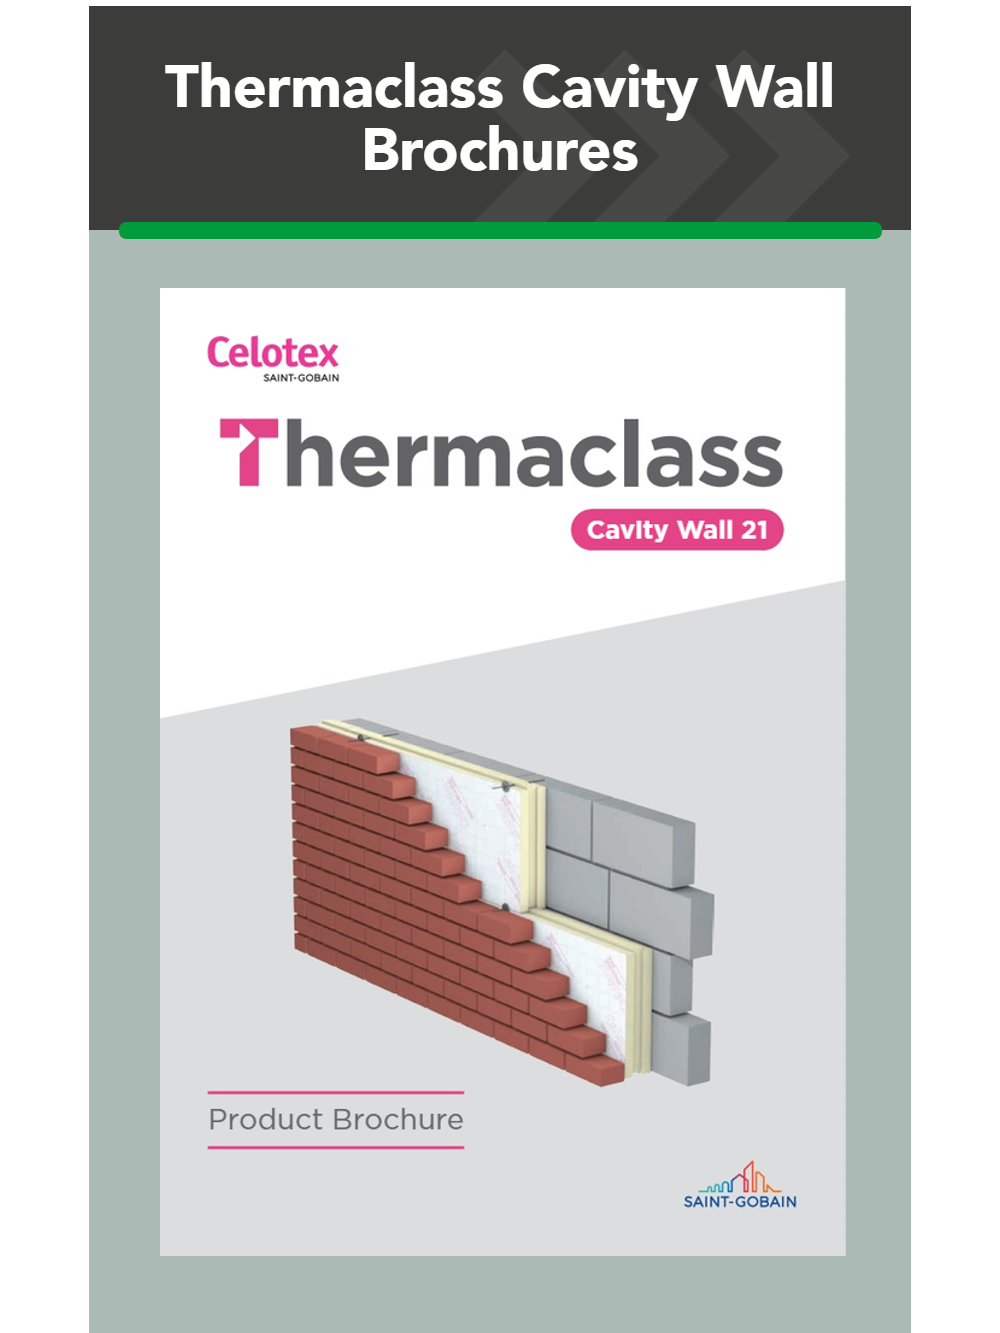 Thermaclass Cavity Wall Brochures